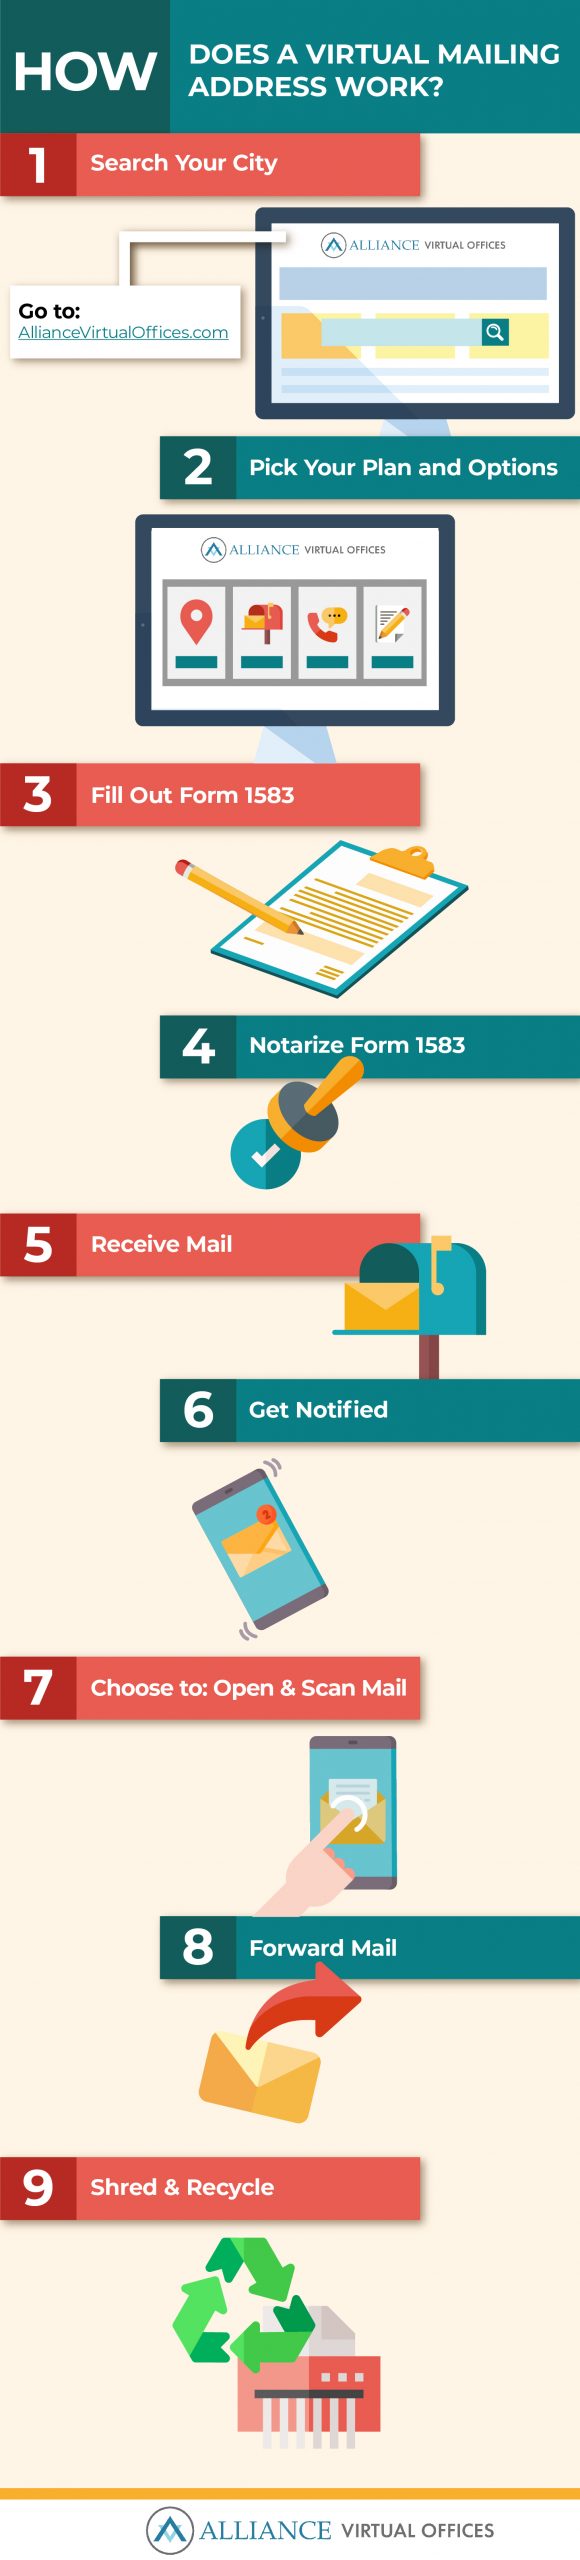 If you purchase a plan to take advantage of the virtual mailing address service, here’s how it typically works - infographic